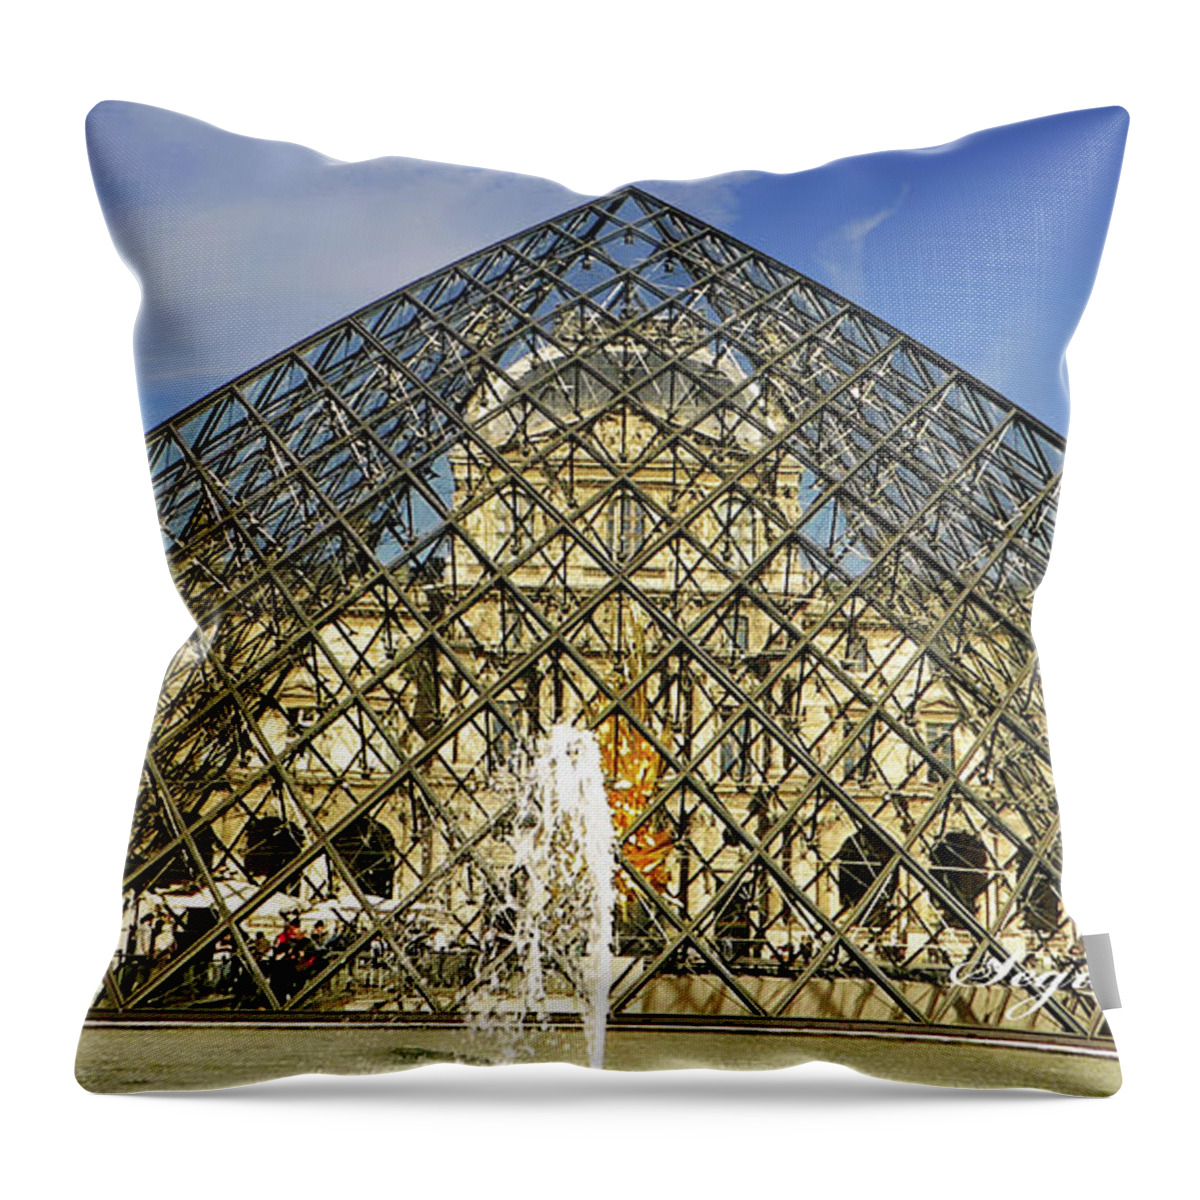 Louvre Throw Pillow featuring the photograph The Pyramid by Segura Shaw Photography